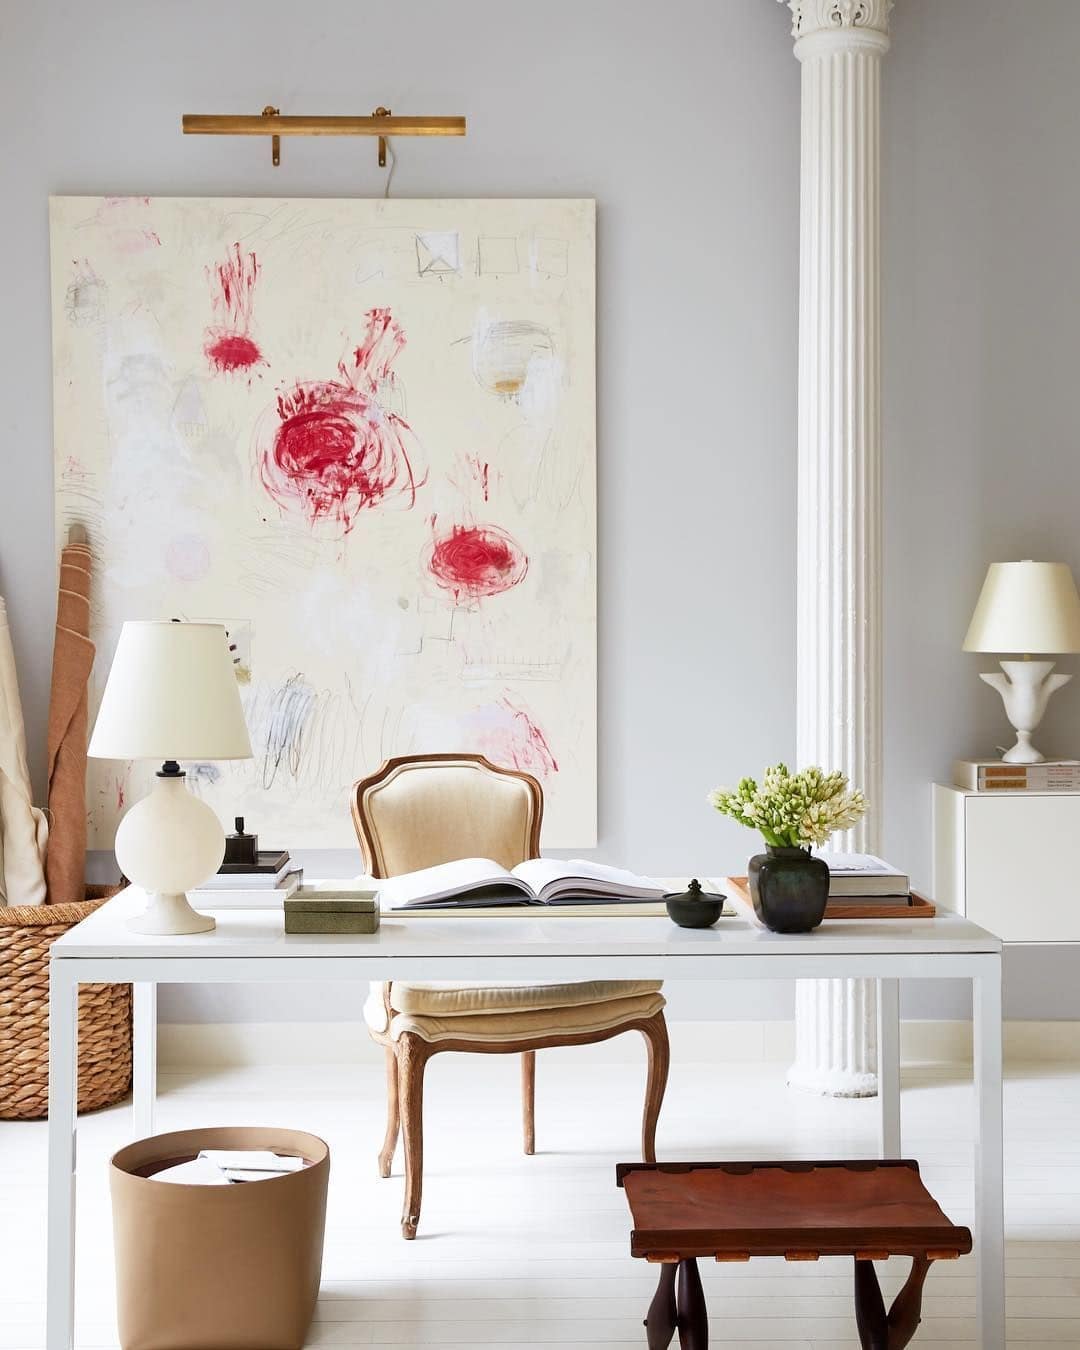 study room with a large floral painting in the background - great idea for making a home look expensive on a budget